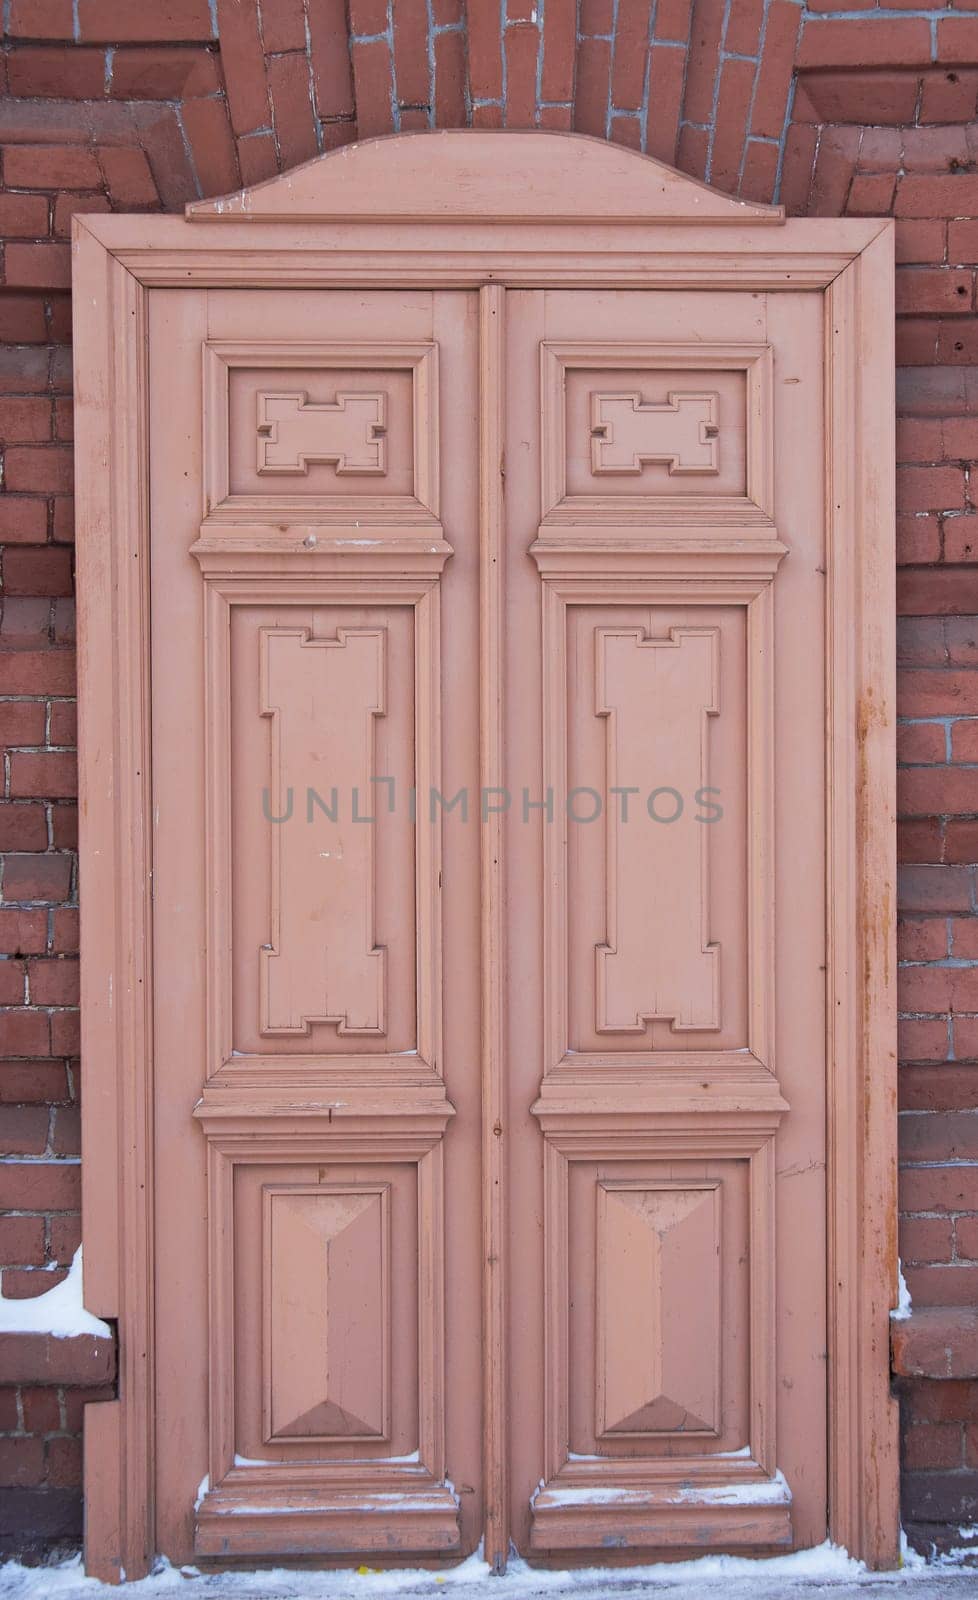 An old brown double-leaf wooden door on a brick wall